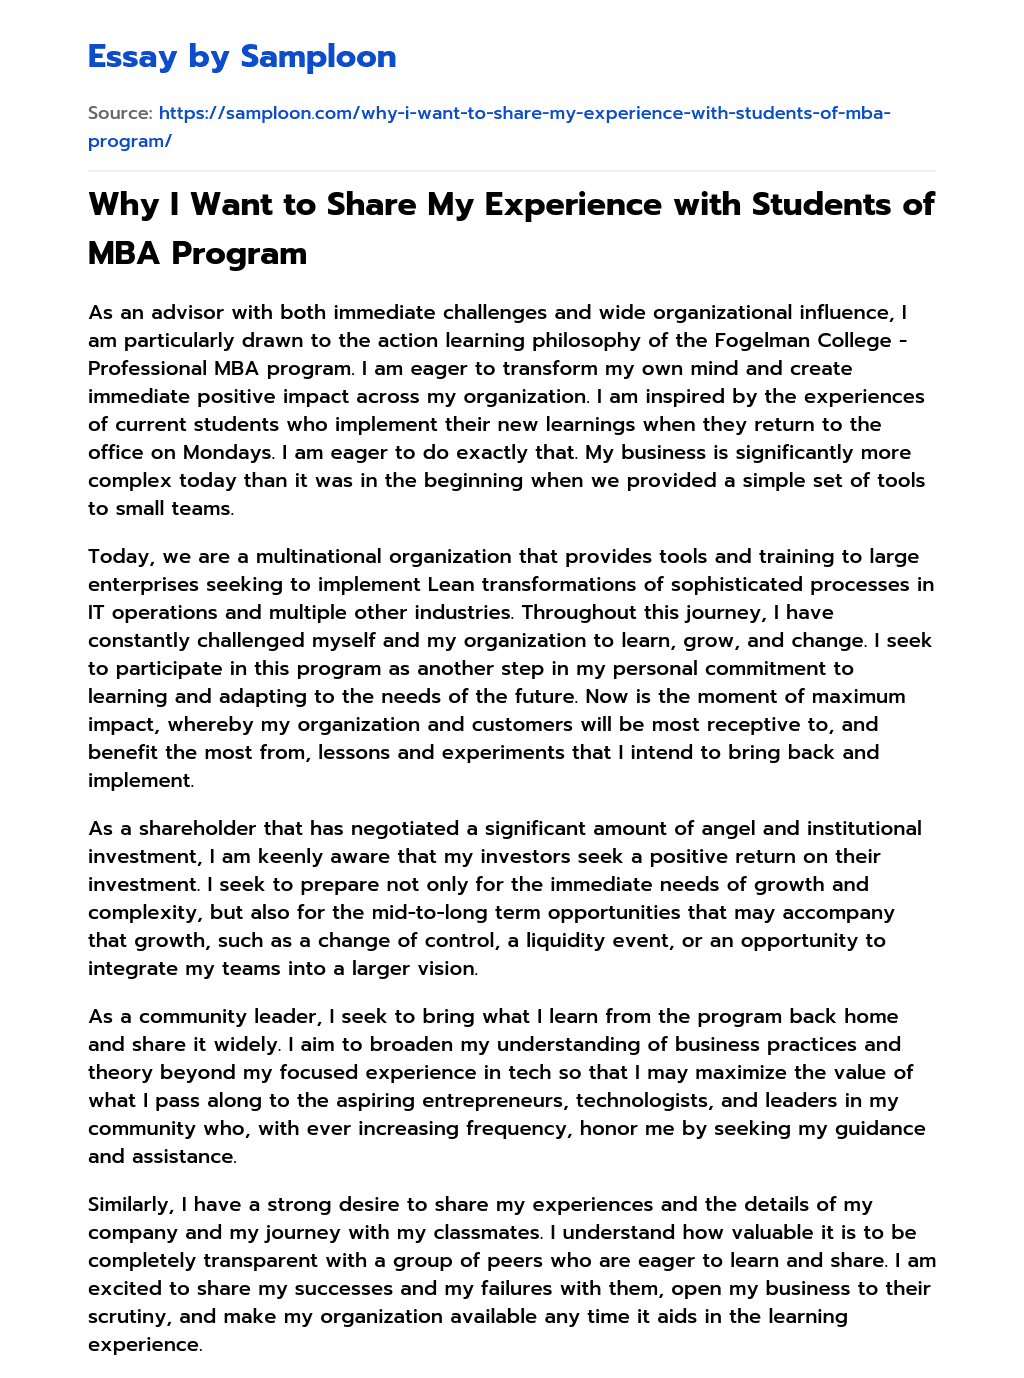 Why I Want to Share My Experience with Students of MBA Program essay